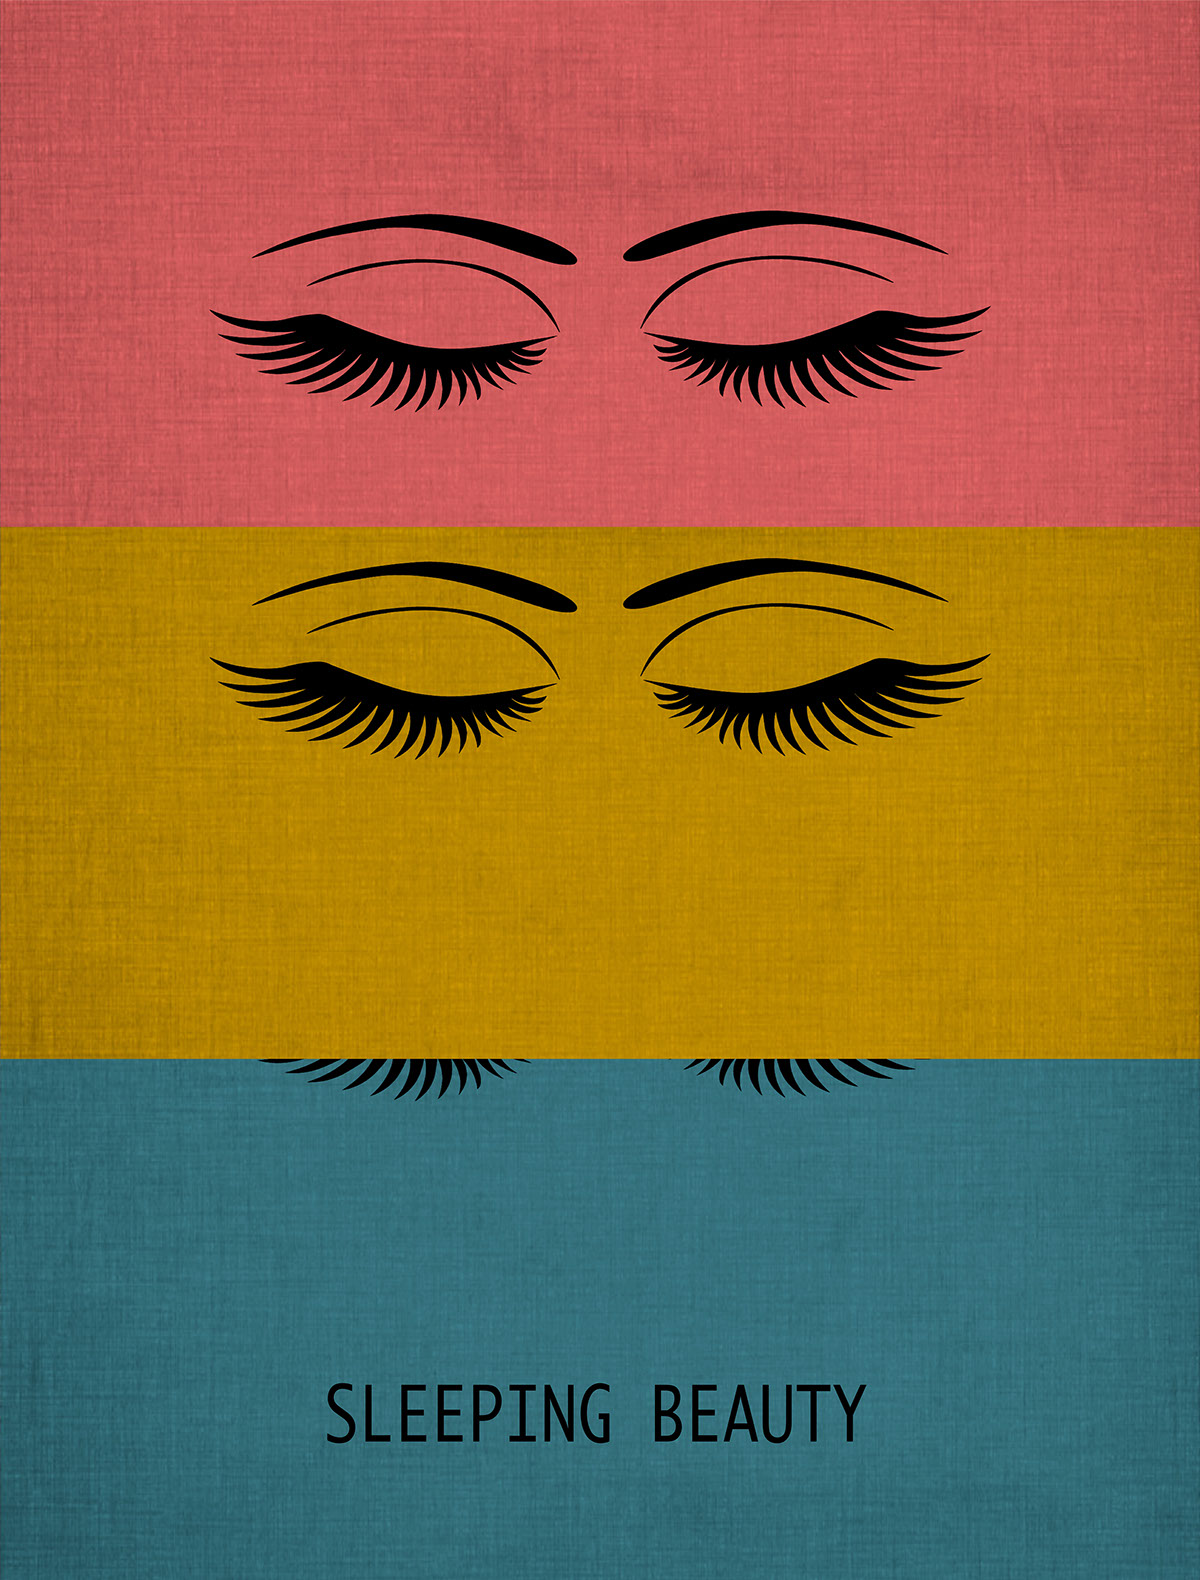 minimaldesing movieposters moviebuff posters hollywood Bollywood minimalistic colorfulposters colorcombinations